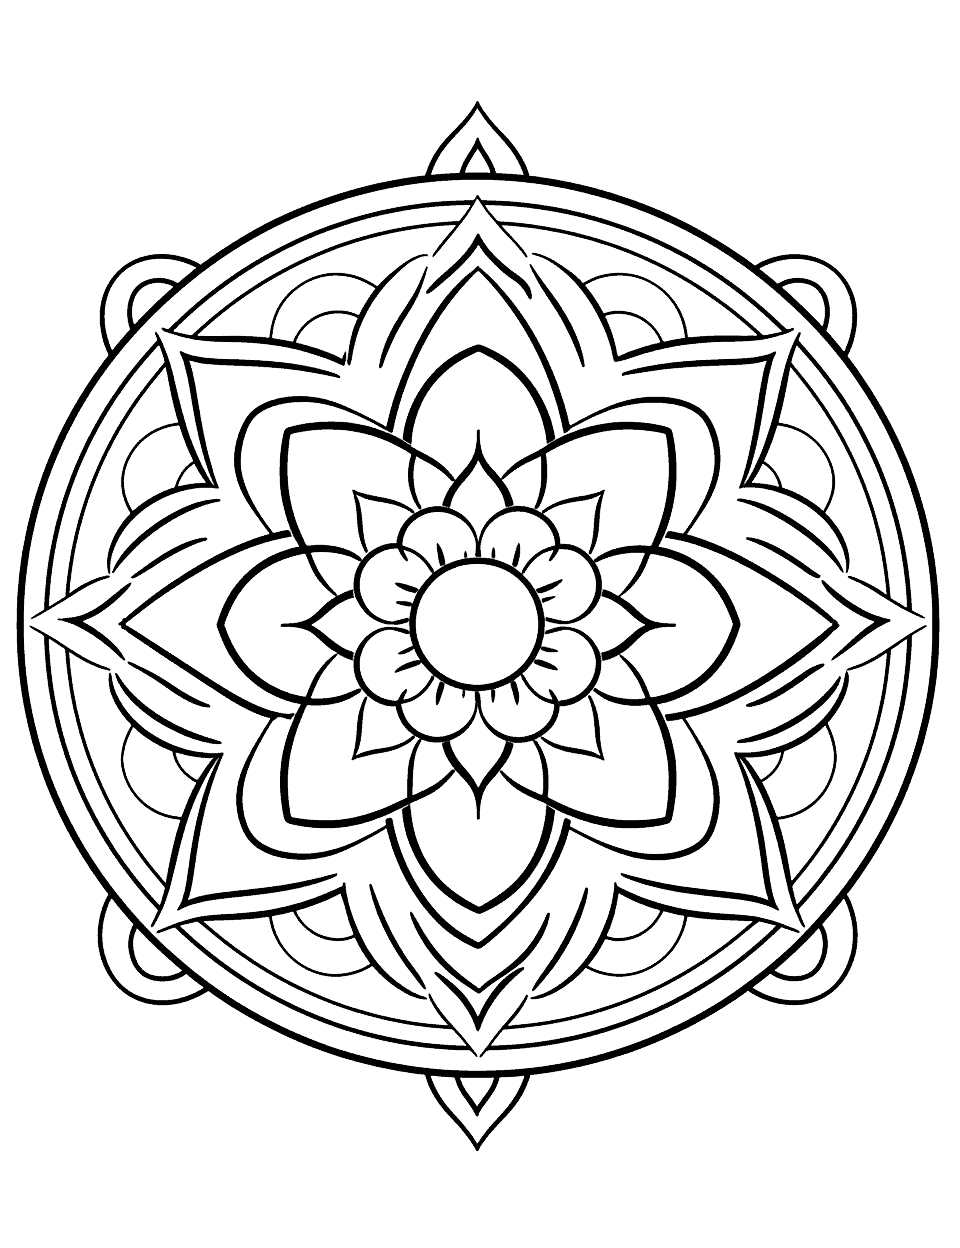 Stress Relief Sunflower Mandala Coloring Page - An easy, relaxing mandala centered around a sunflower, designed to provide stress relief.